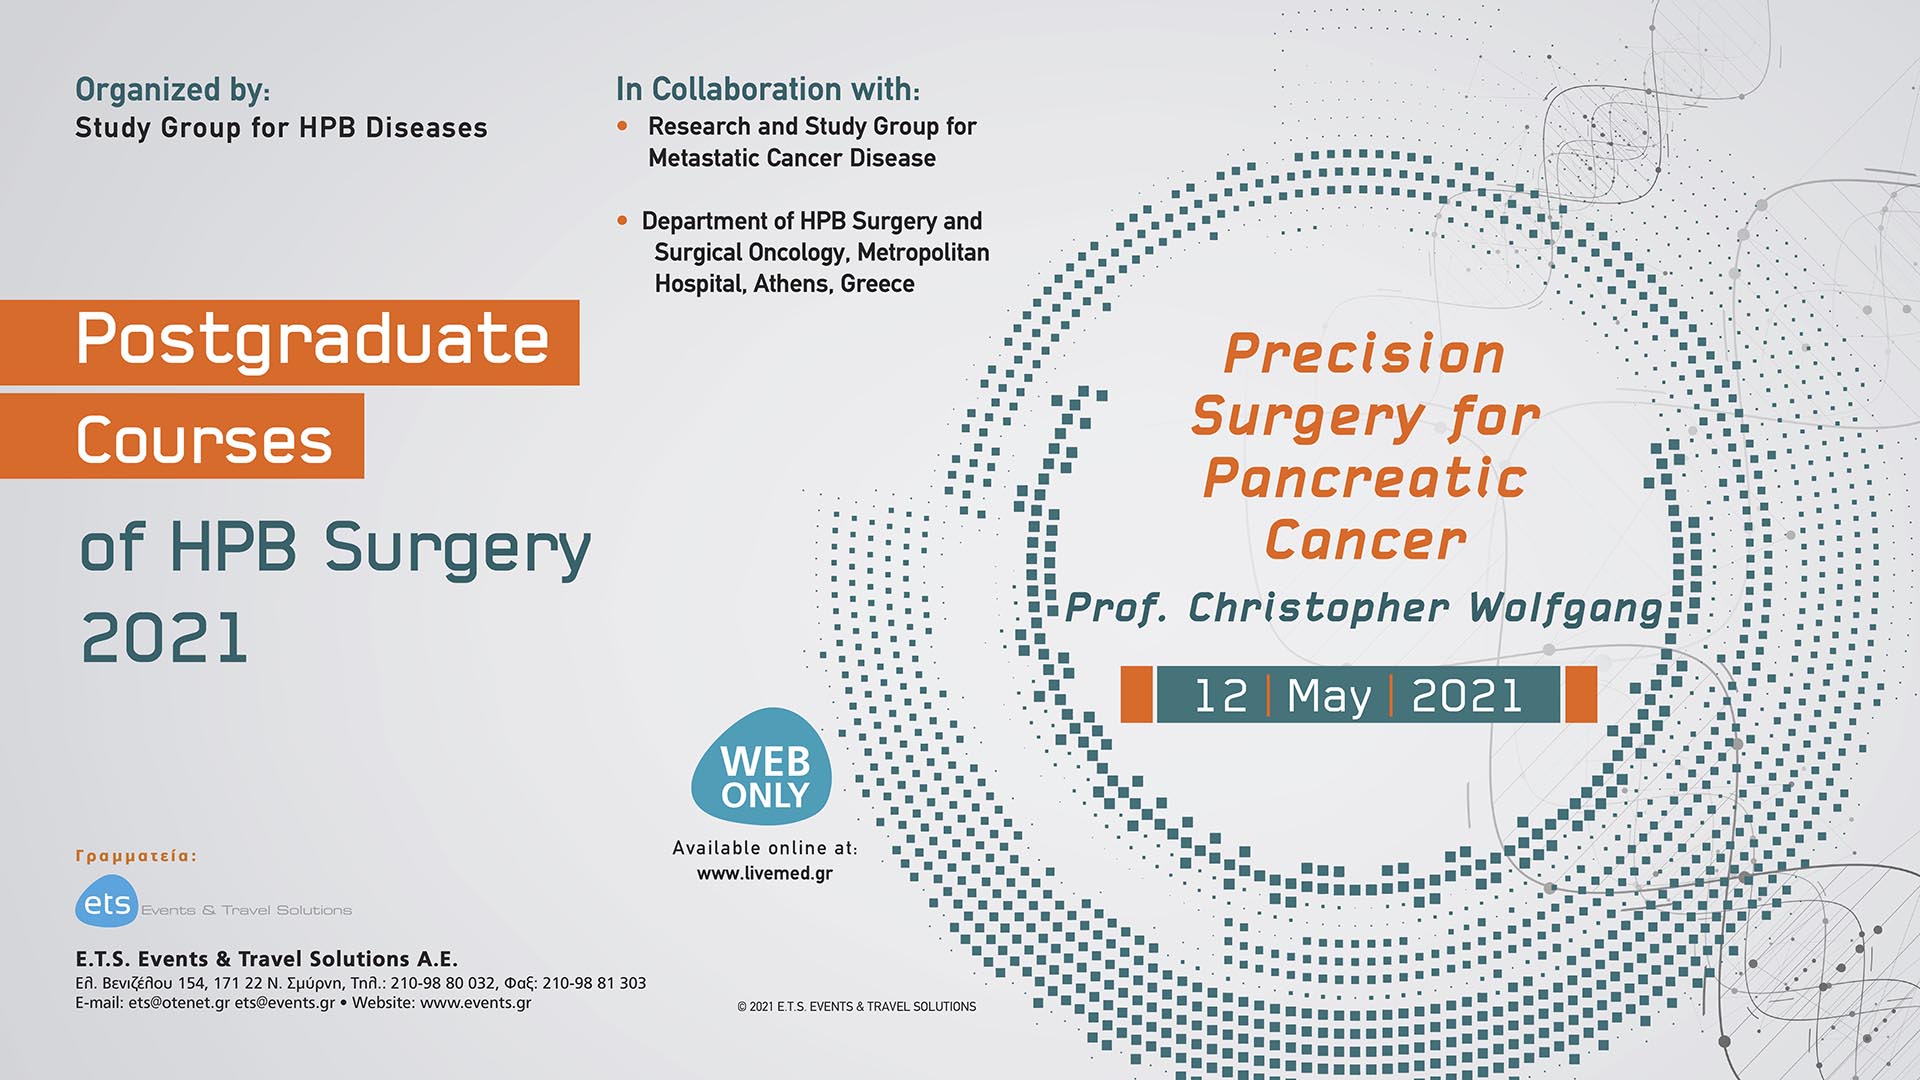 Postgraduate Courses of HPB Surgery 2021 - Precision Surgery for Pancreatic Cancer